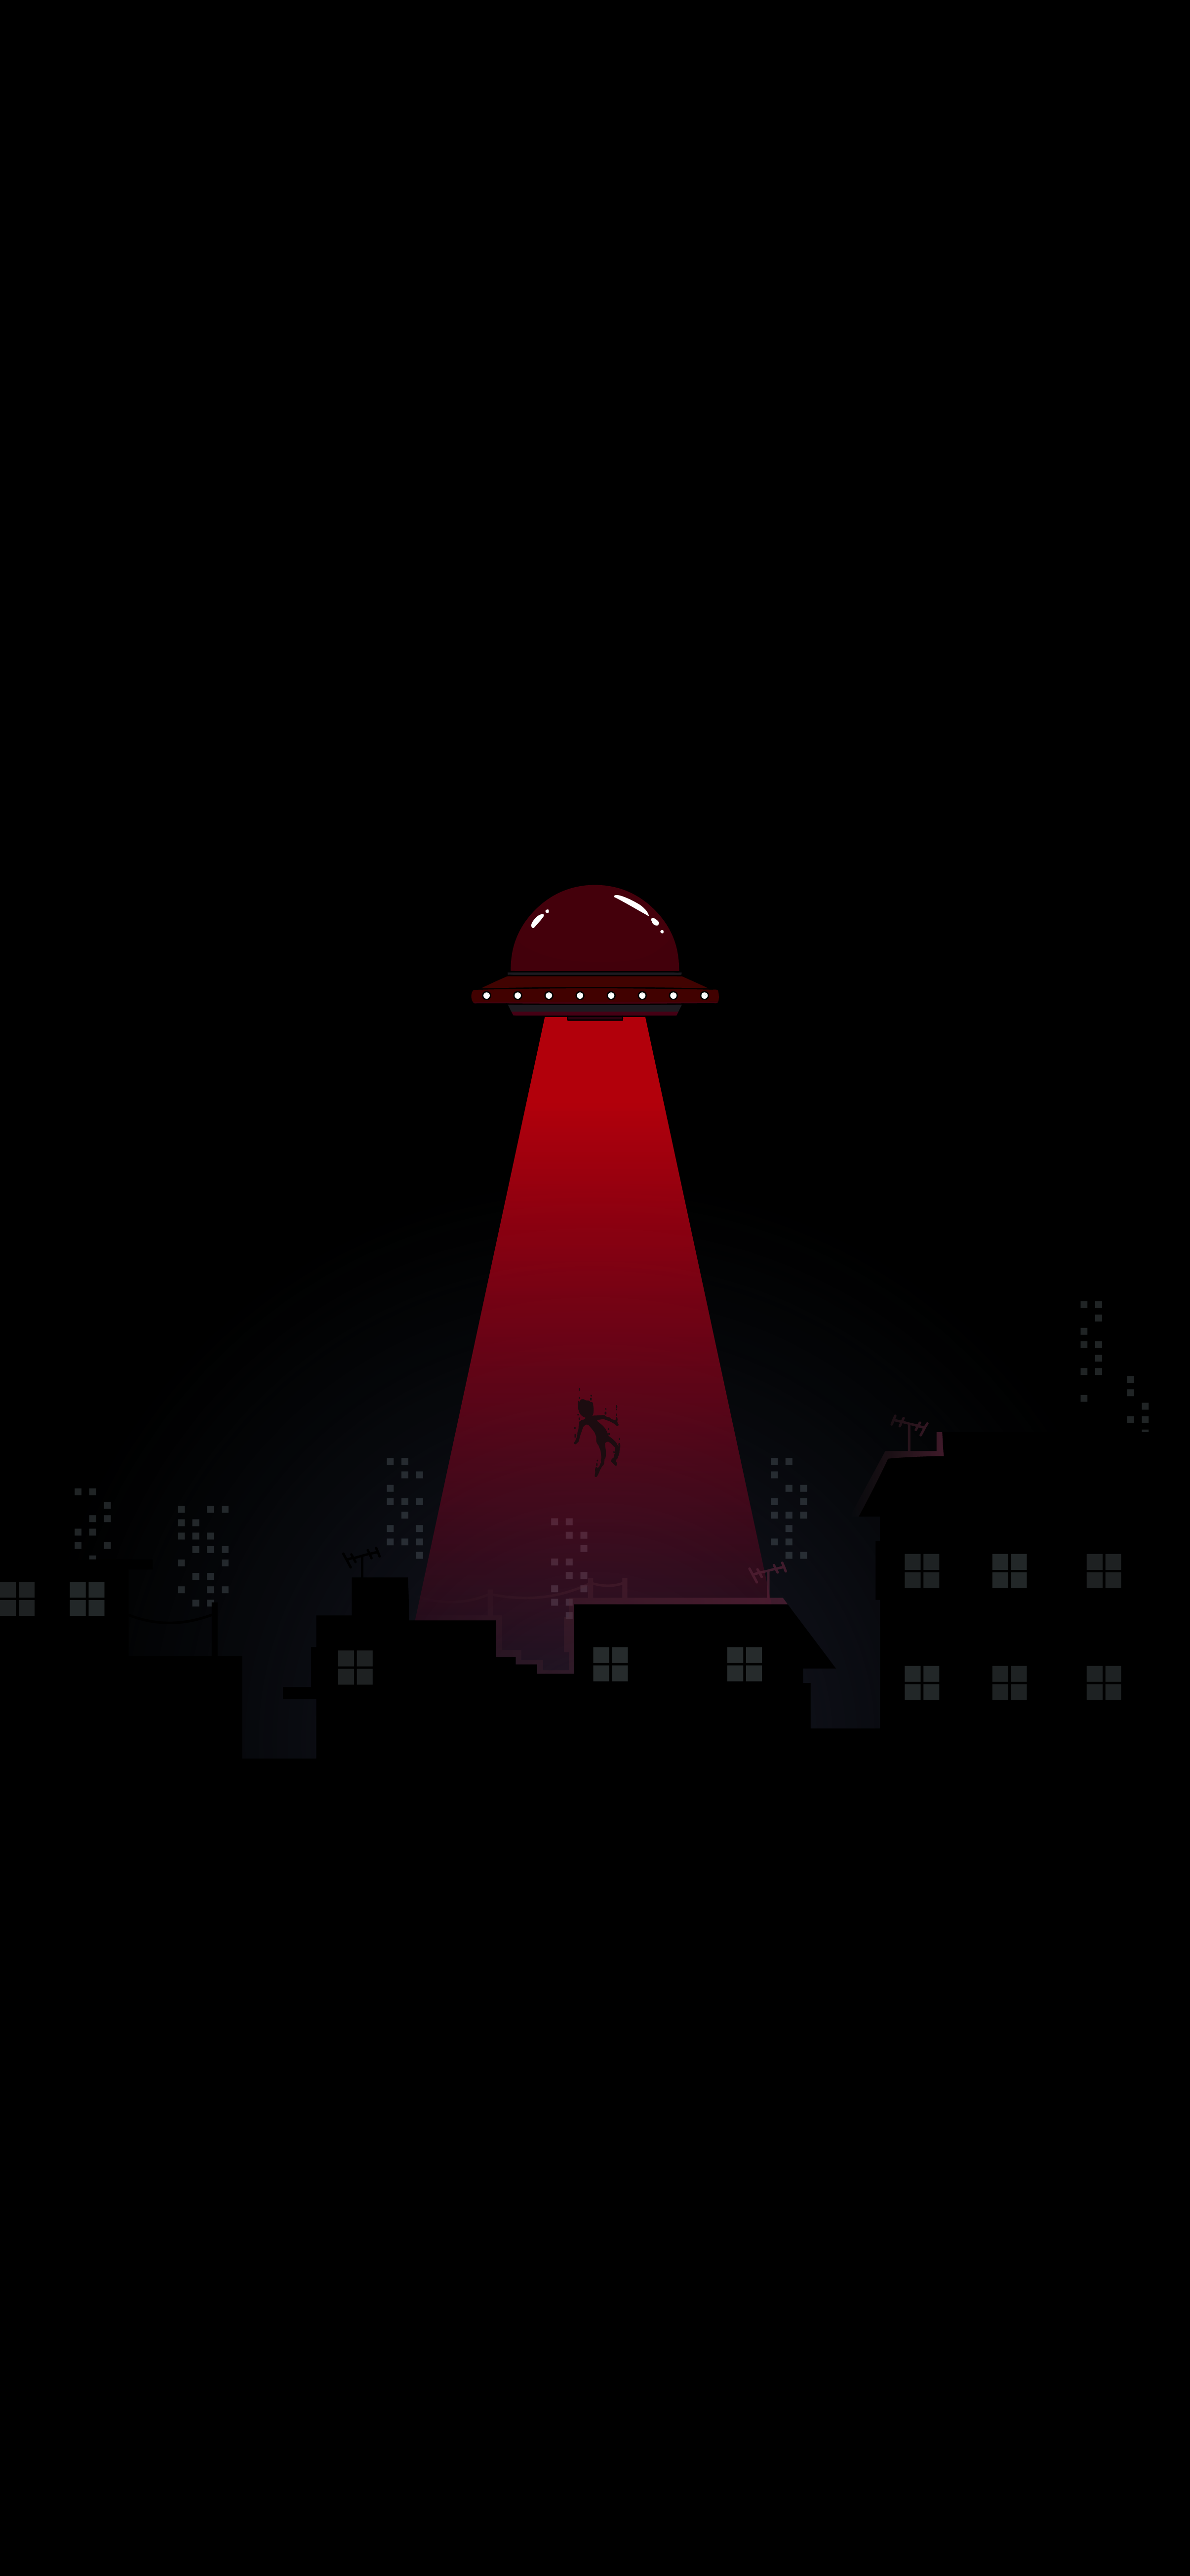 COOL MINIMALIST ILLUSTRATION OF AN UFO ABDUCTION. IT'S A COOL IMAGE TO SET AS PHONE WALLPAPER